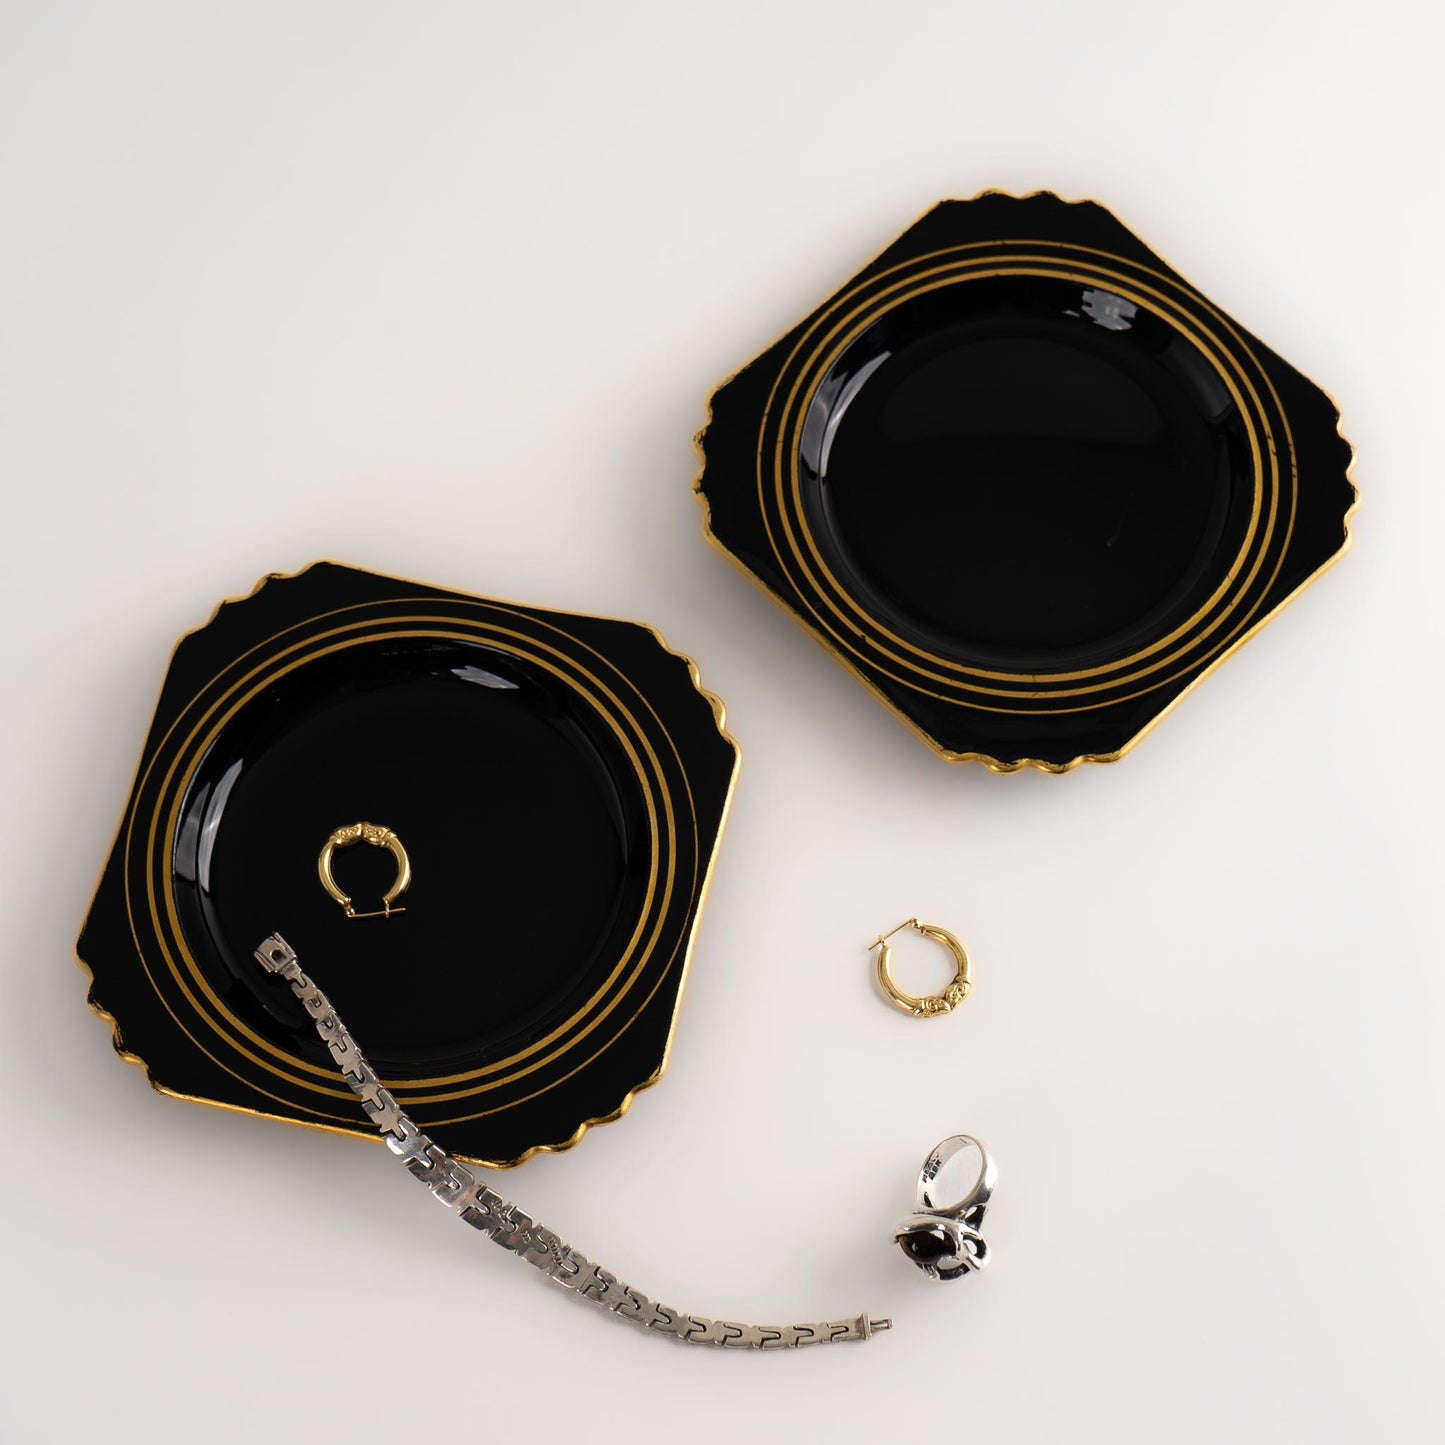 Vintage Black and Gold Jewelry Catchall Dishes